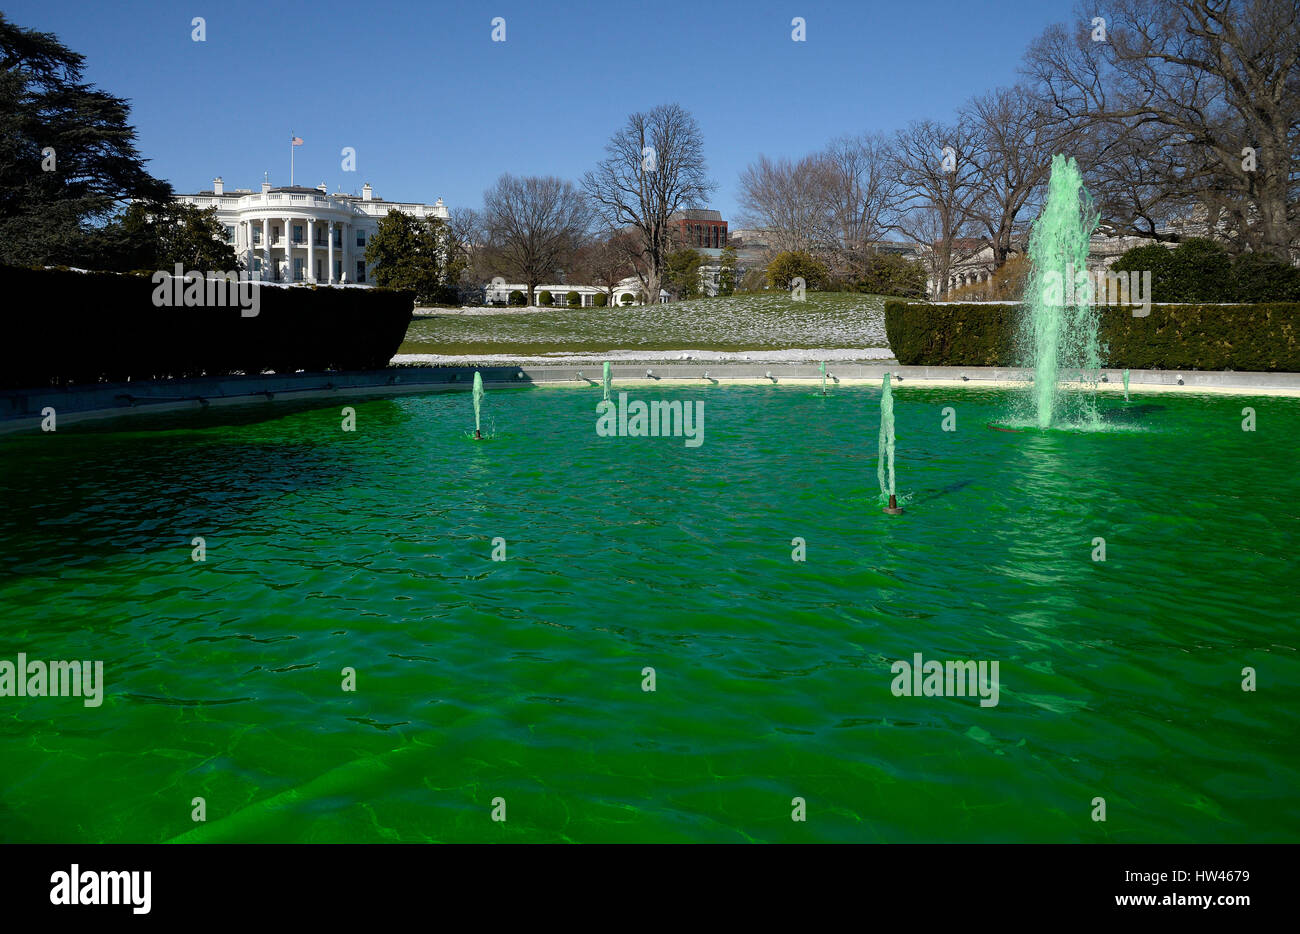 Washington, DC. 16th Mar, 2017. Fountain on the South side of the White House is dyed green for St. Patrick's Day in Washington, DC, on March 16, 2017 in Washington, DC. Credit: Olivier Douliery/Pool via CNP - NO WIRE SERVICE - Photo: Olivier Douliery/Consolidated News Photos/Olivier Douliery - Pool via CNP/dpa/Alamy Live News Stock Photo